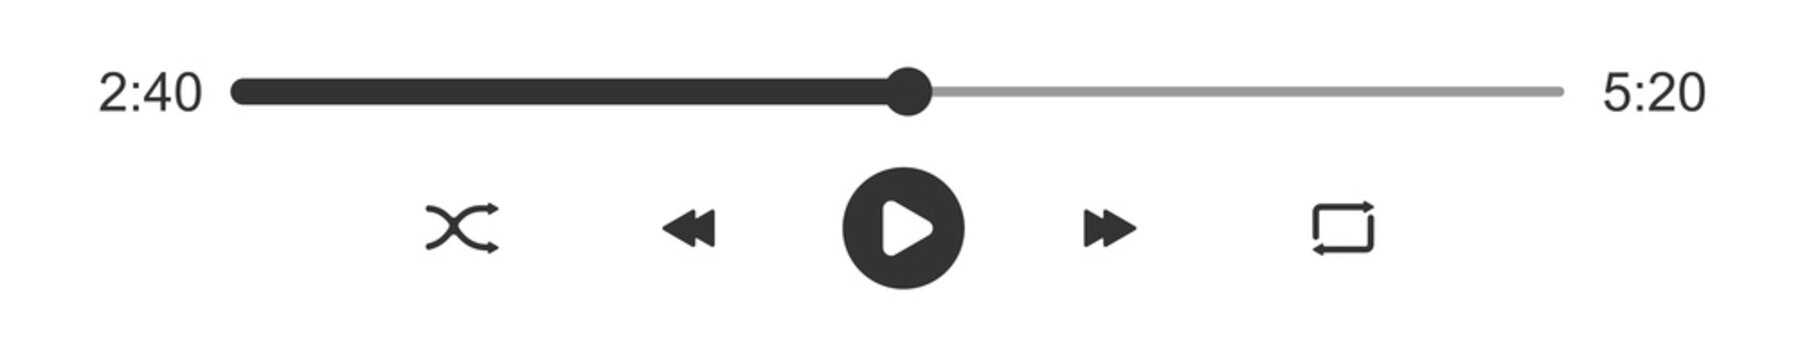 Audio or video player progress loading bar with time slider. Play, shuffle, repeat, rewind and fast forward buttons. Template of media player playback panel interface. Vector graphic illustration